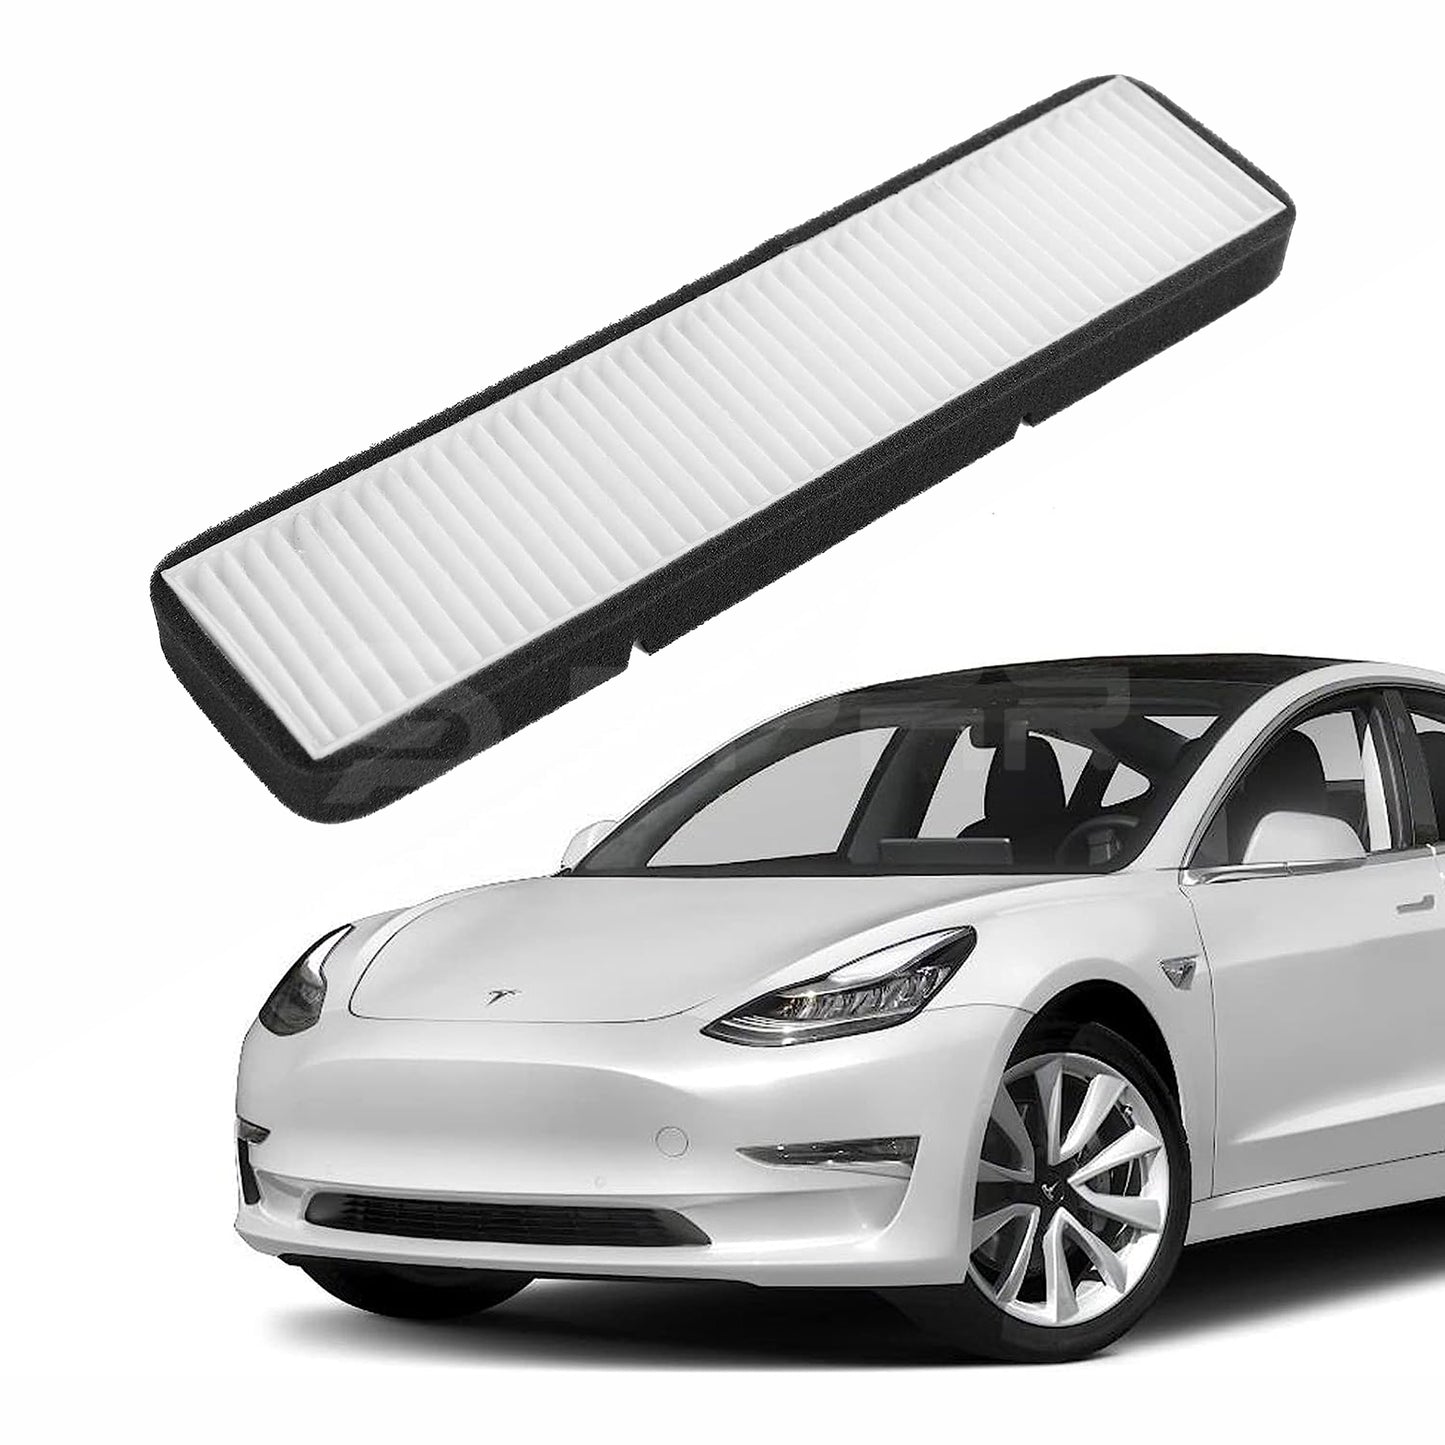 Air Inlet Filter Non-Woven Fabric for Tesla Model 3/Y